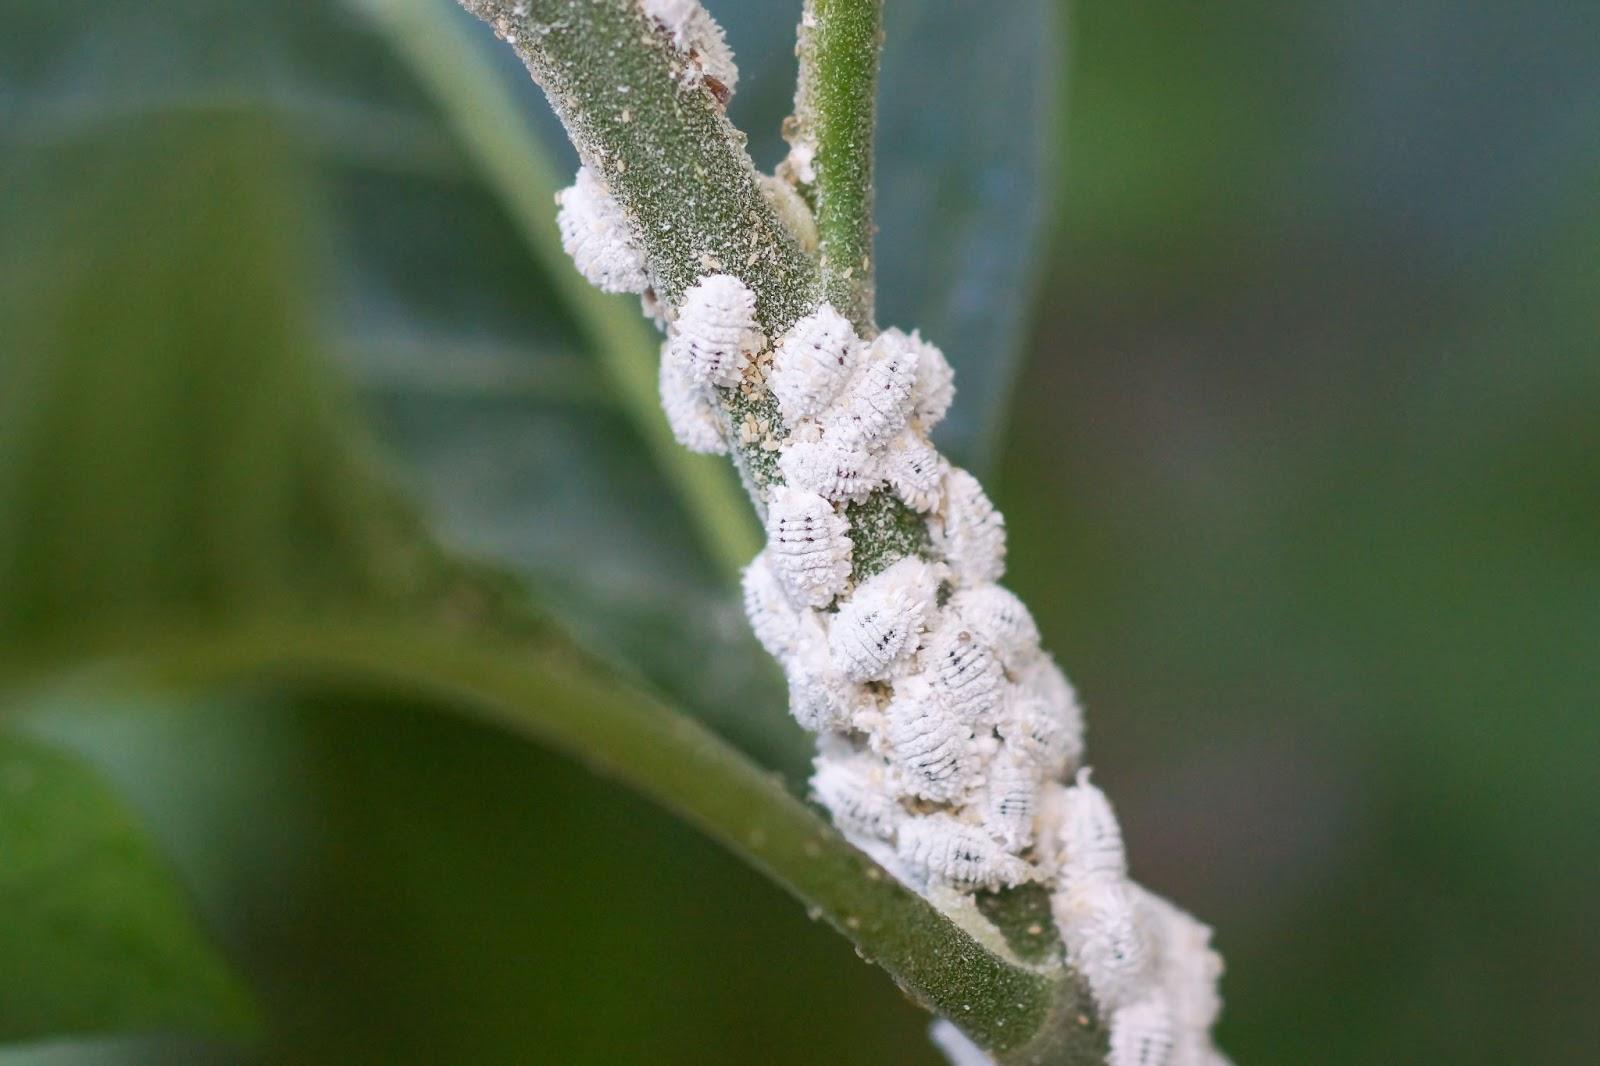 A true infestation of mealybugs. (Photo: weerapat1003/stock.adobe.com)